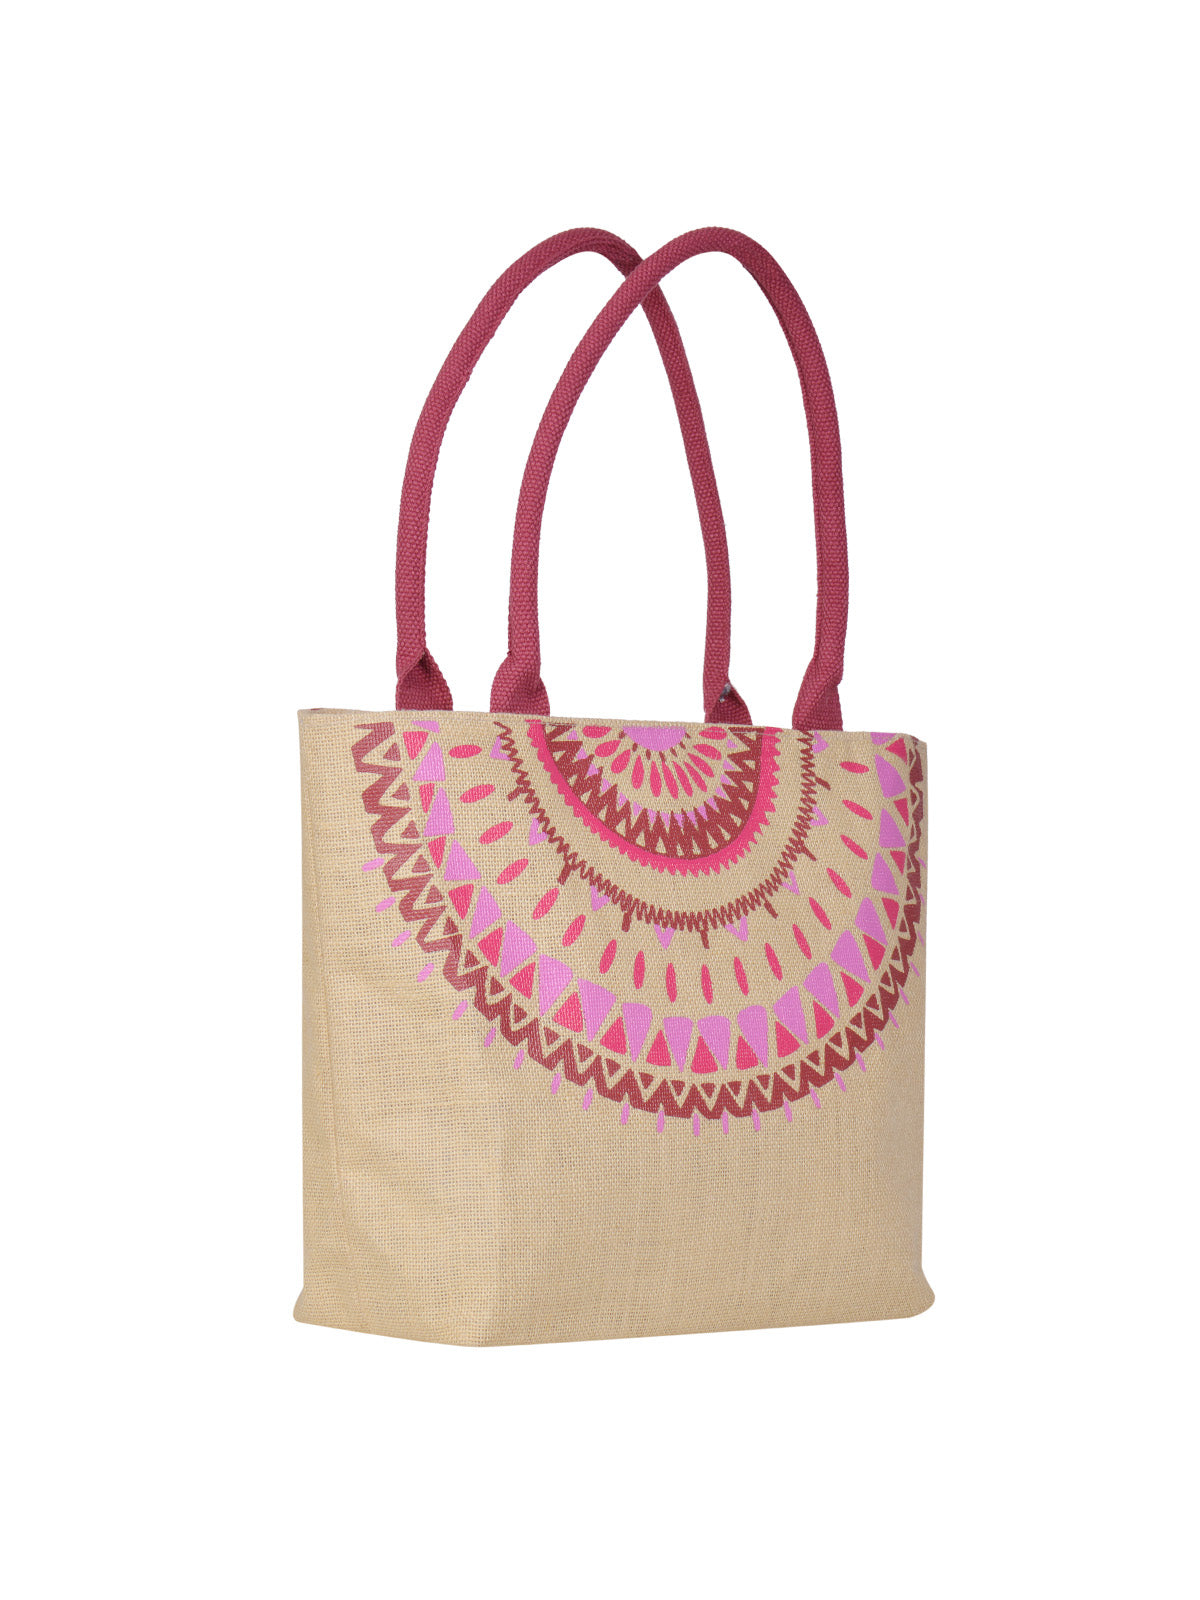 Emmaline Bags: Sewing Patterns and Purse Supplies: The Luxie-Lunch Bag  Pattern - A New Pattern Release - Contest closed!